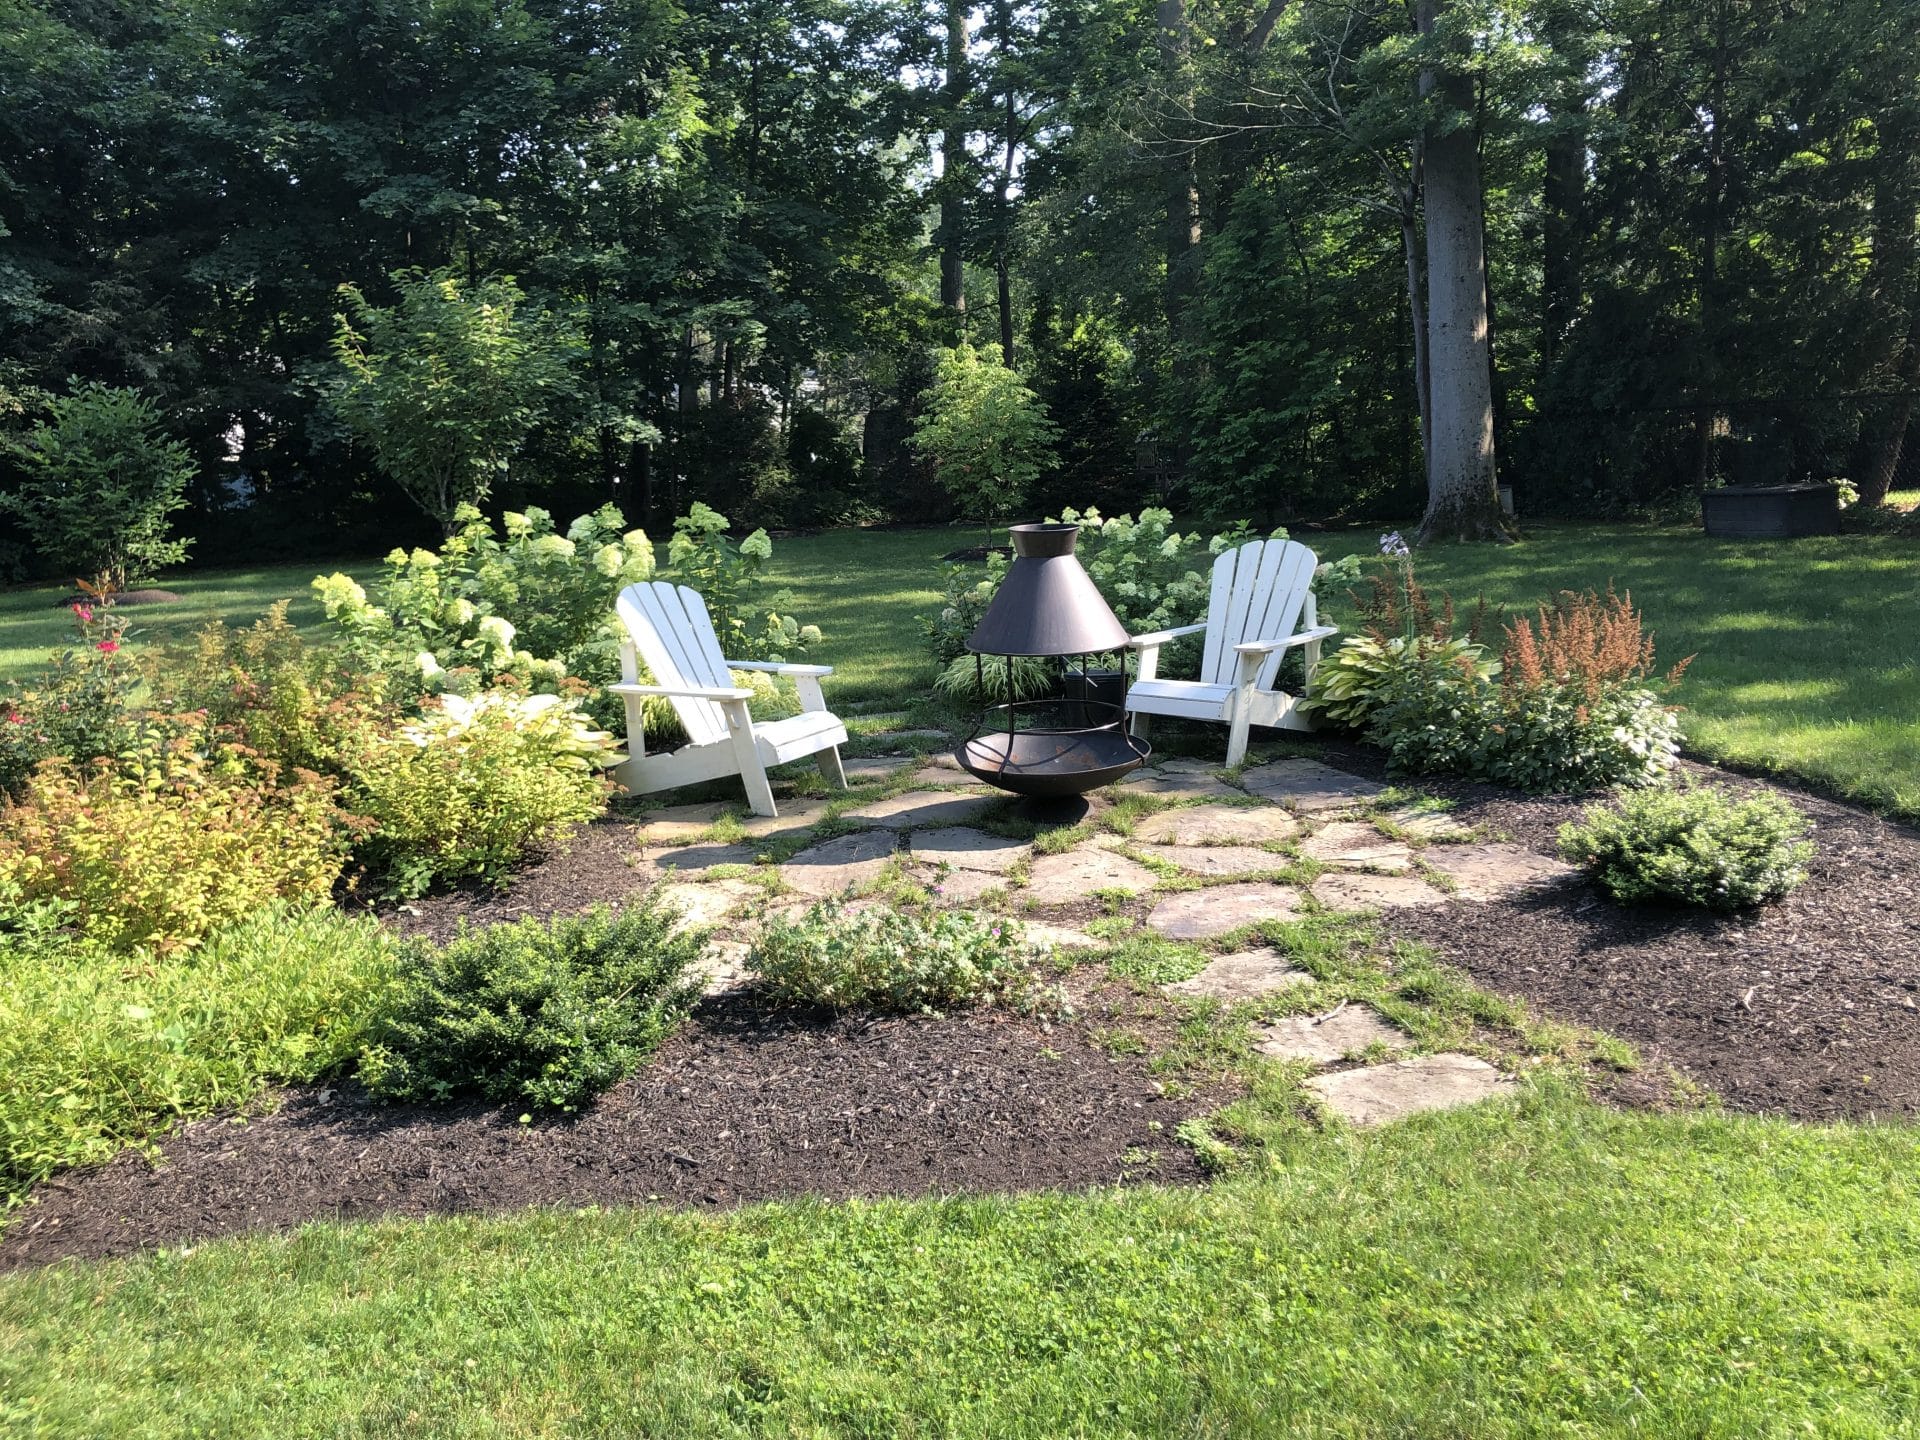 This Scarsdale natural stone patio has been situated as a floating island of plantings where one can relax and enjoy their surroundings